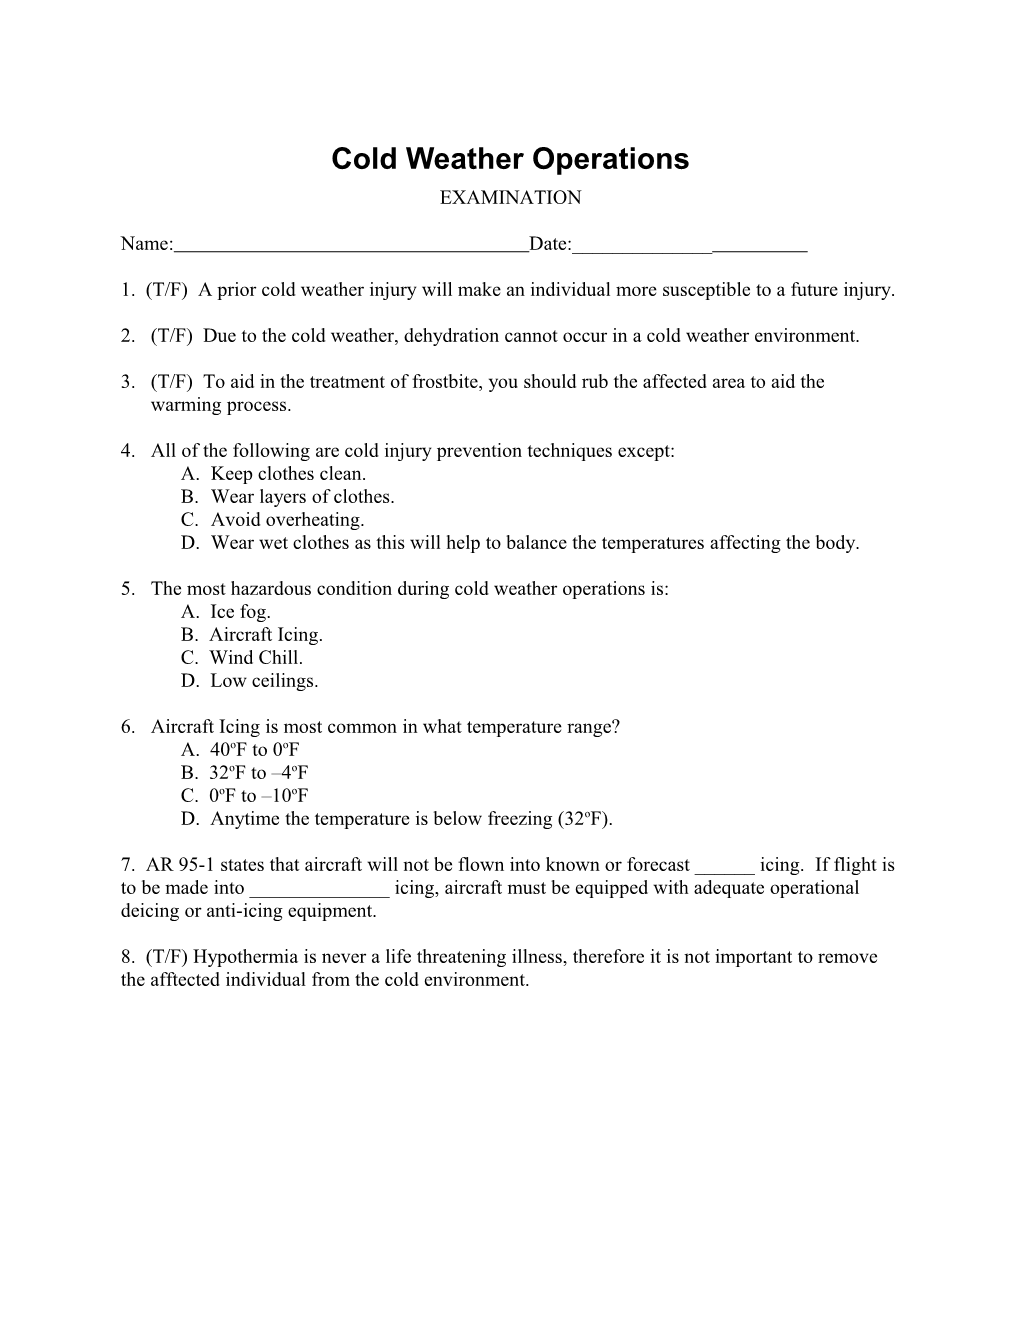 Cold Weather Operations Exam